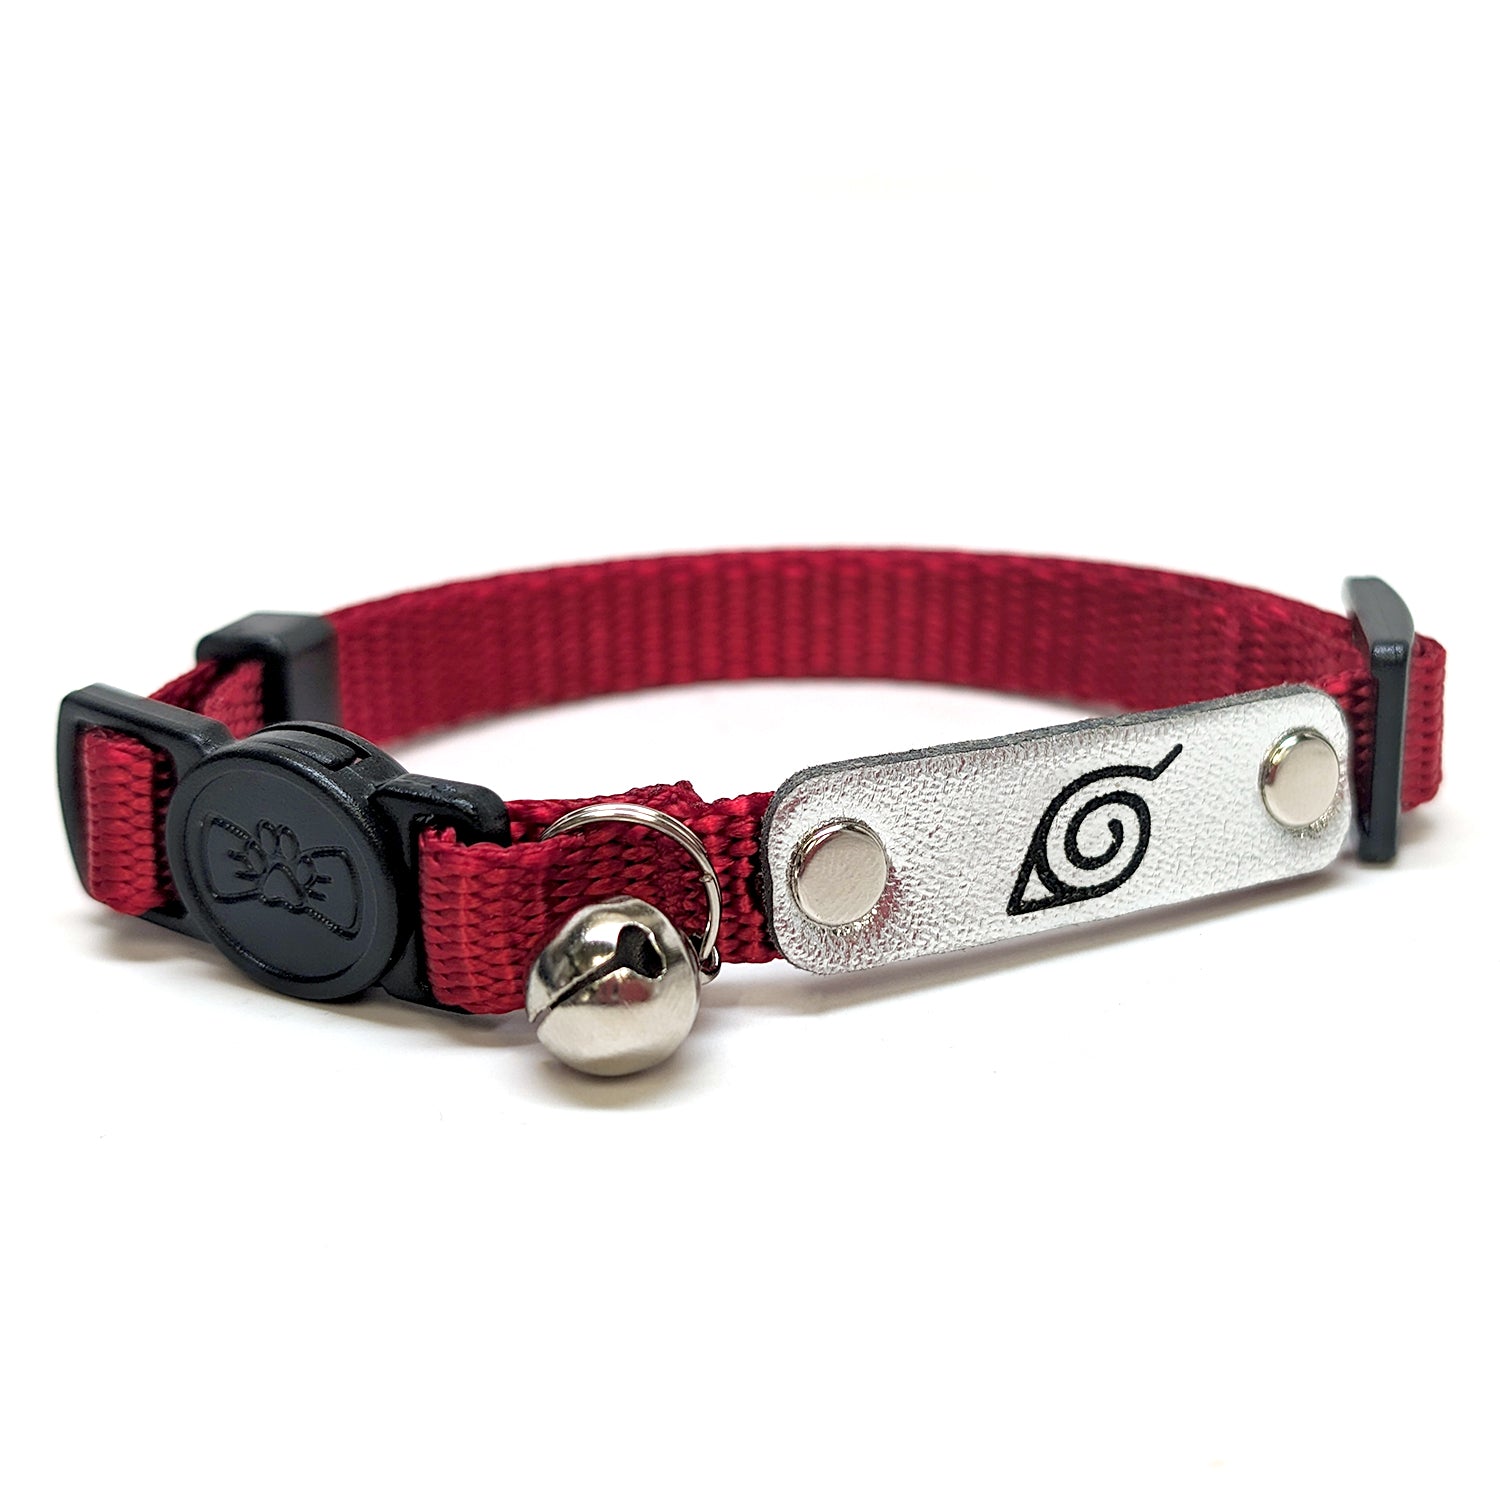 Naruto Shippuden x Pawsonify - Officially Licensed Ninja Collar (Red) for Cats #size_Cat: 8.5-12